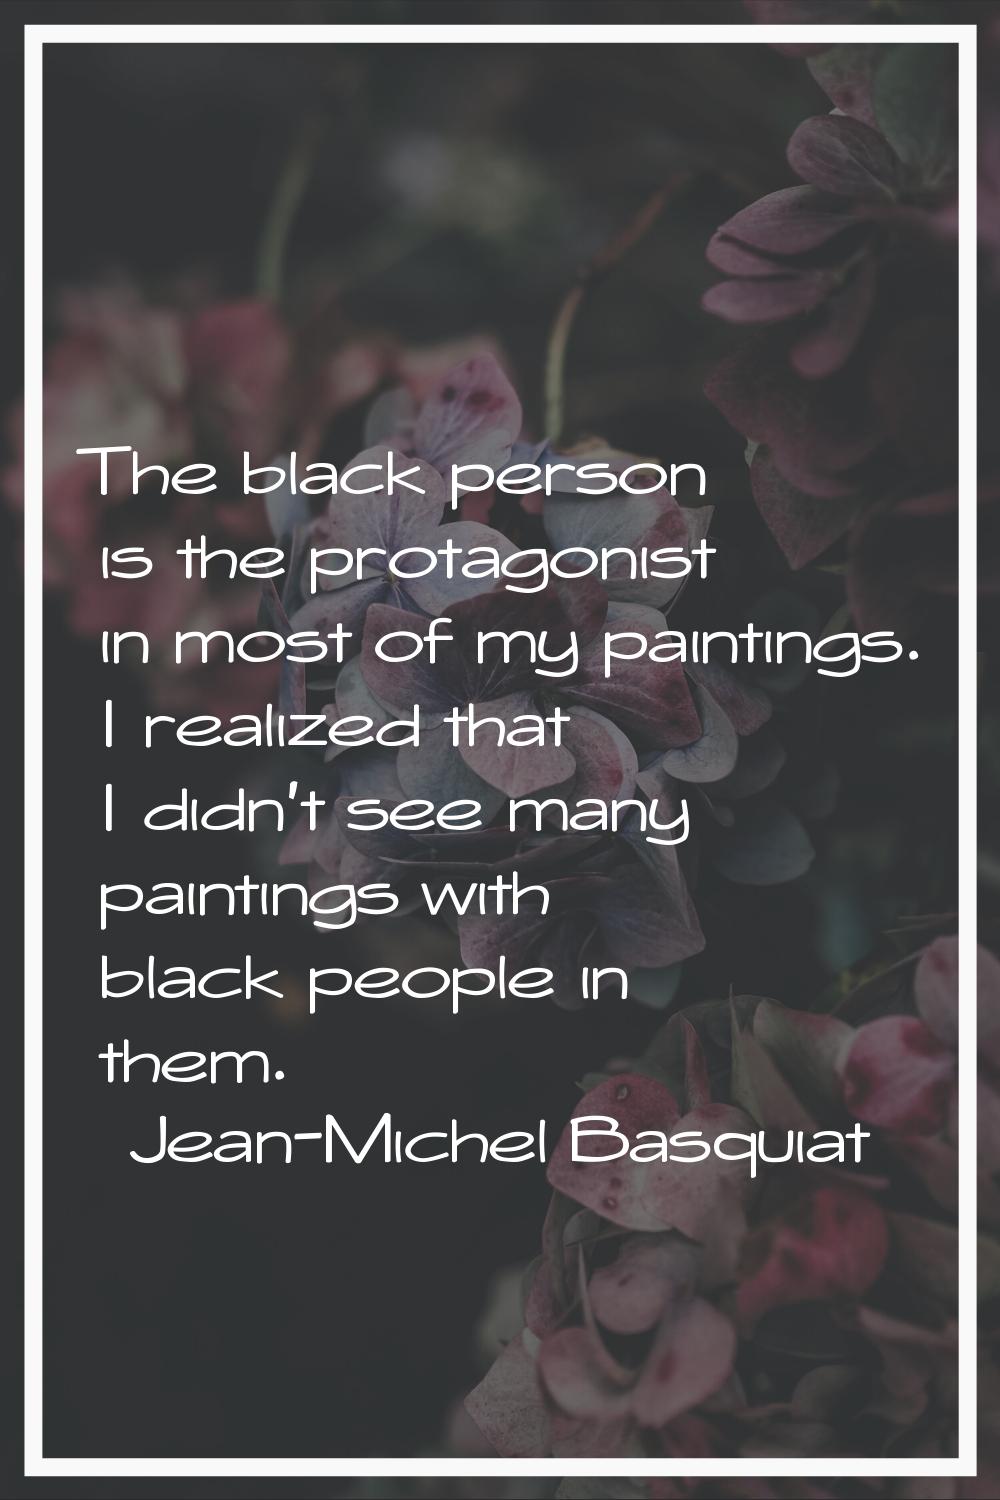 The black person is the protagonist in most of my paintings. I realized that I didn't see many pain